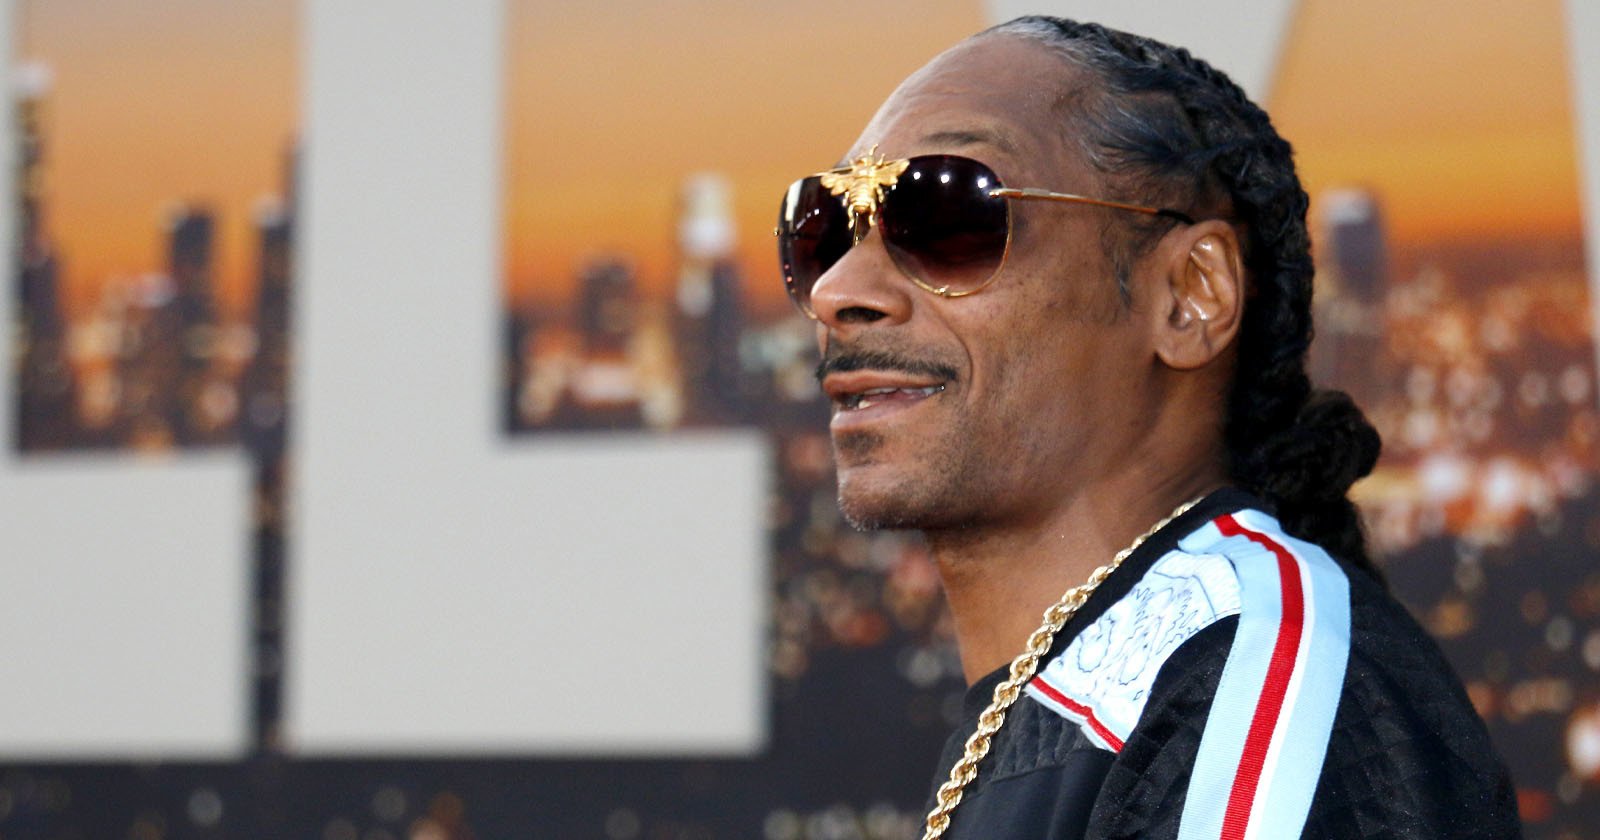 Snoop Dogg: Photographers Shouldnt Own Their Photos of Celebrities